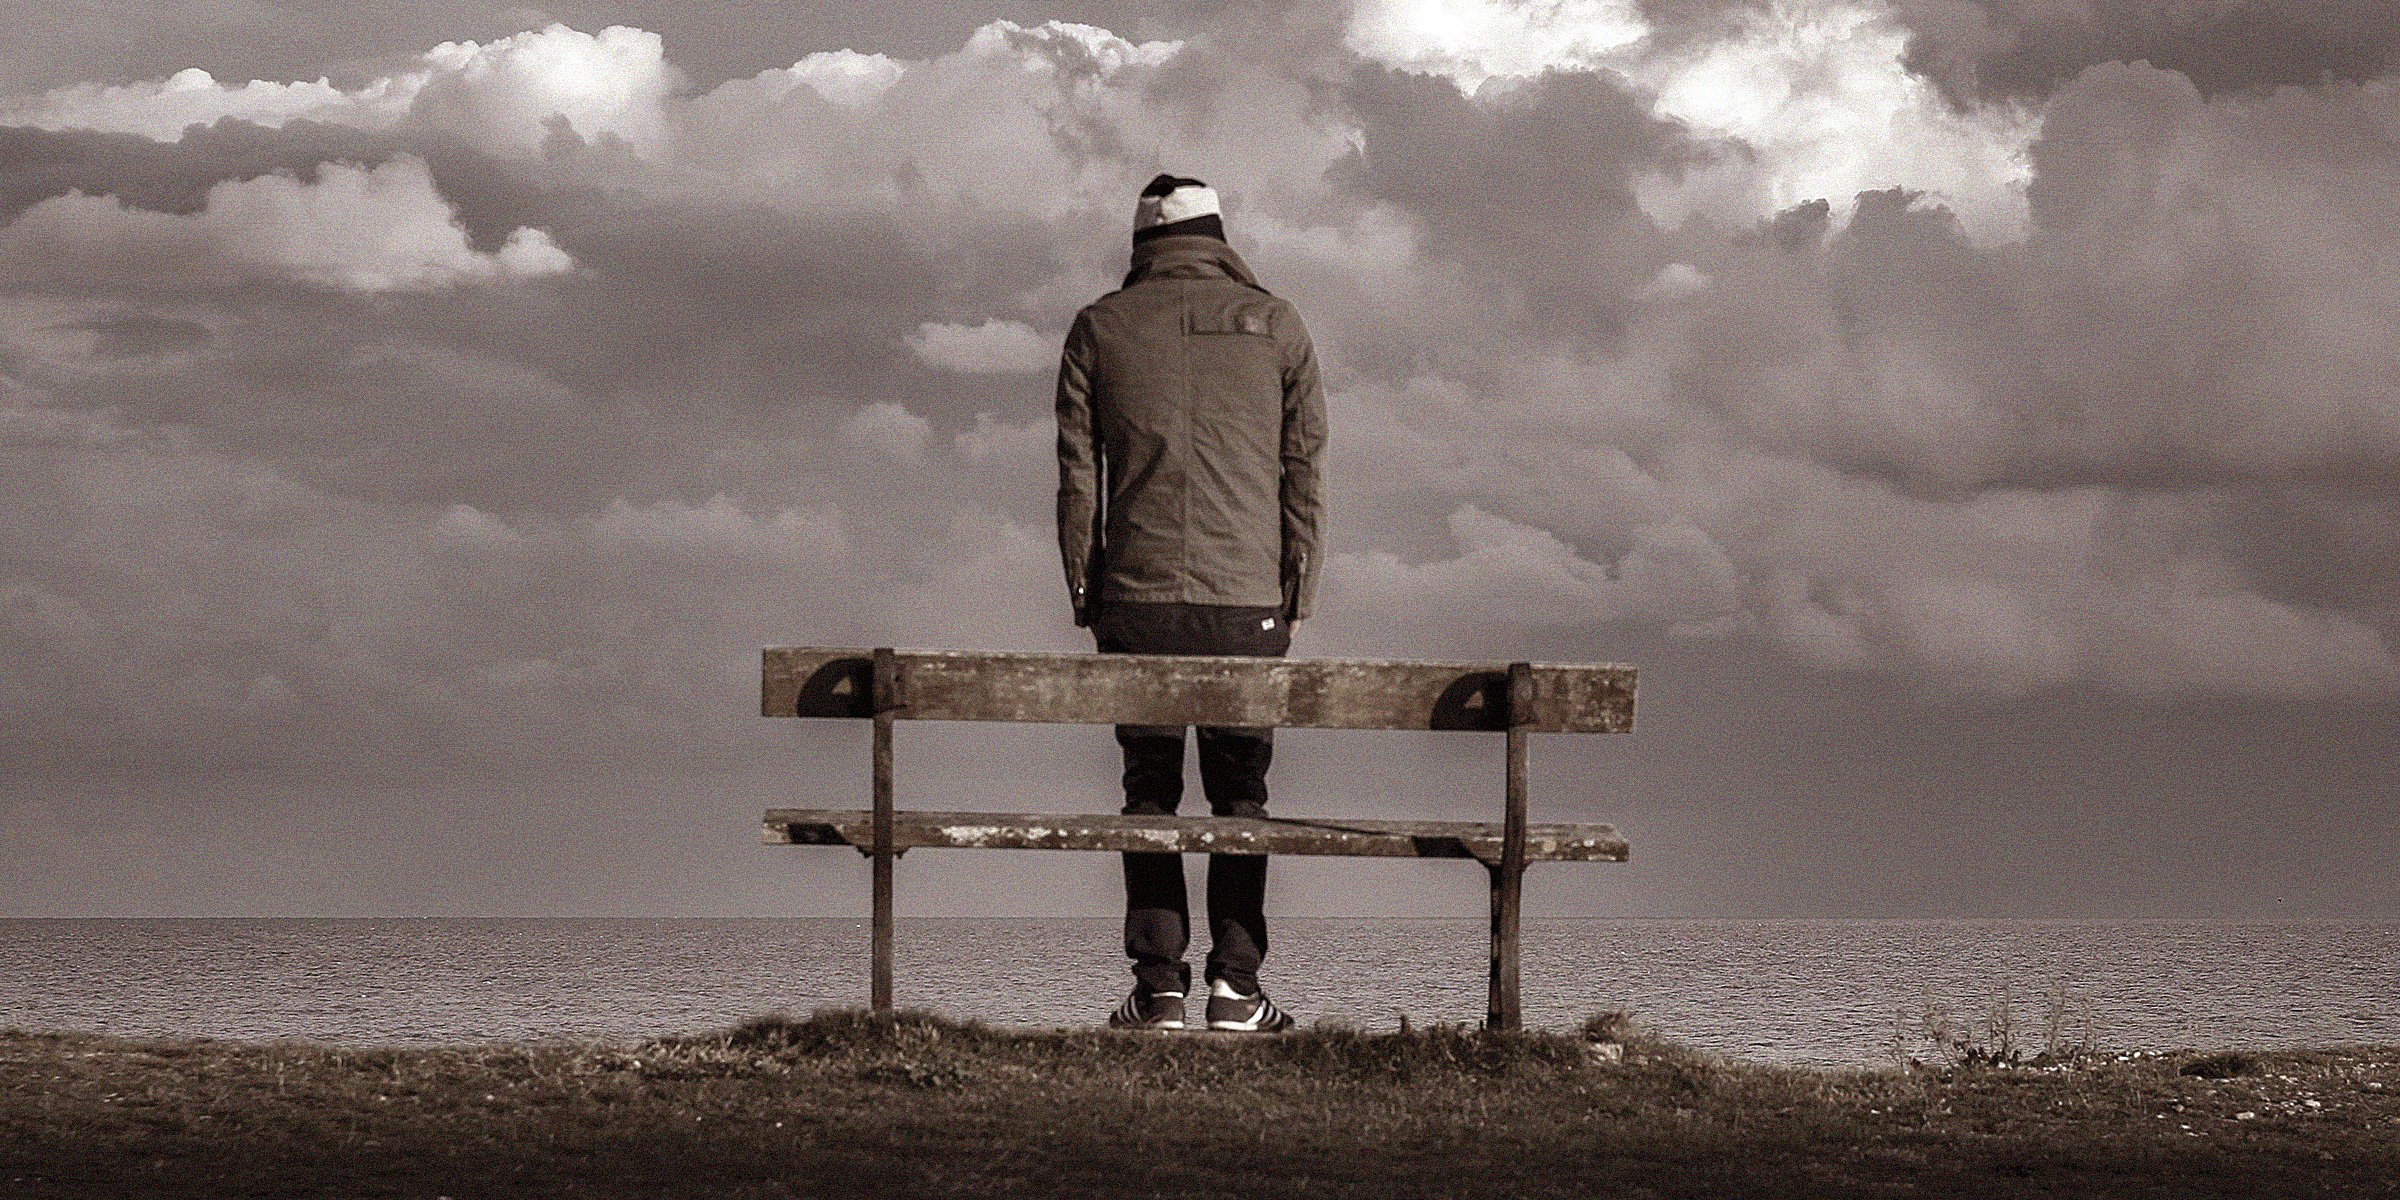 A man standing in front of a bench while overlooking the ocean | Source: Unsplash